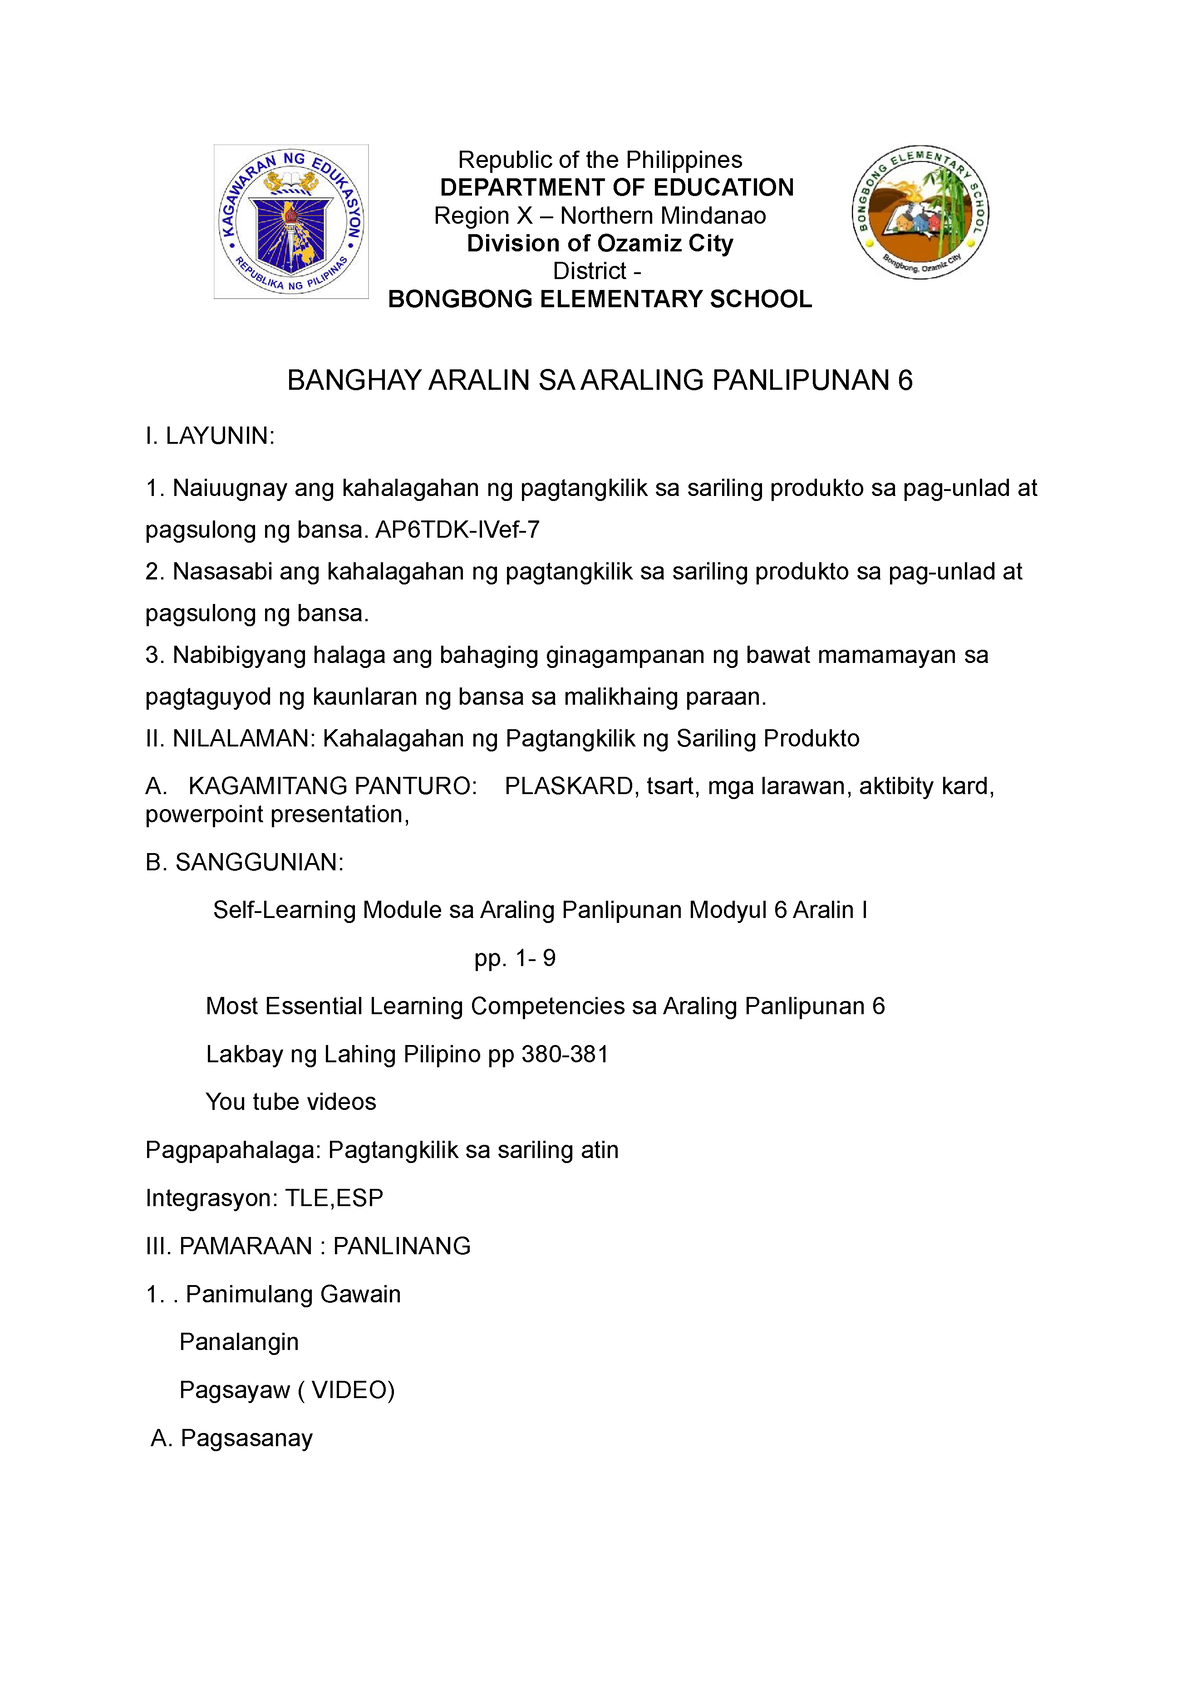 Cot 2 Lesson Plan Araling Panlipunan Republic Of The Philippines Department Of Education 6479